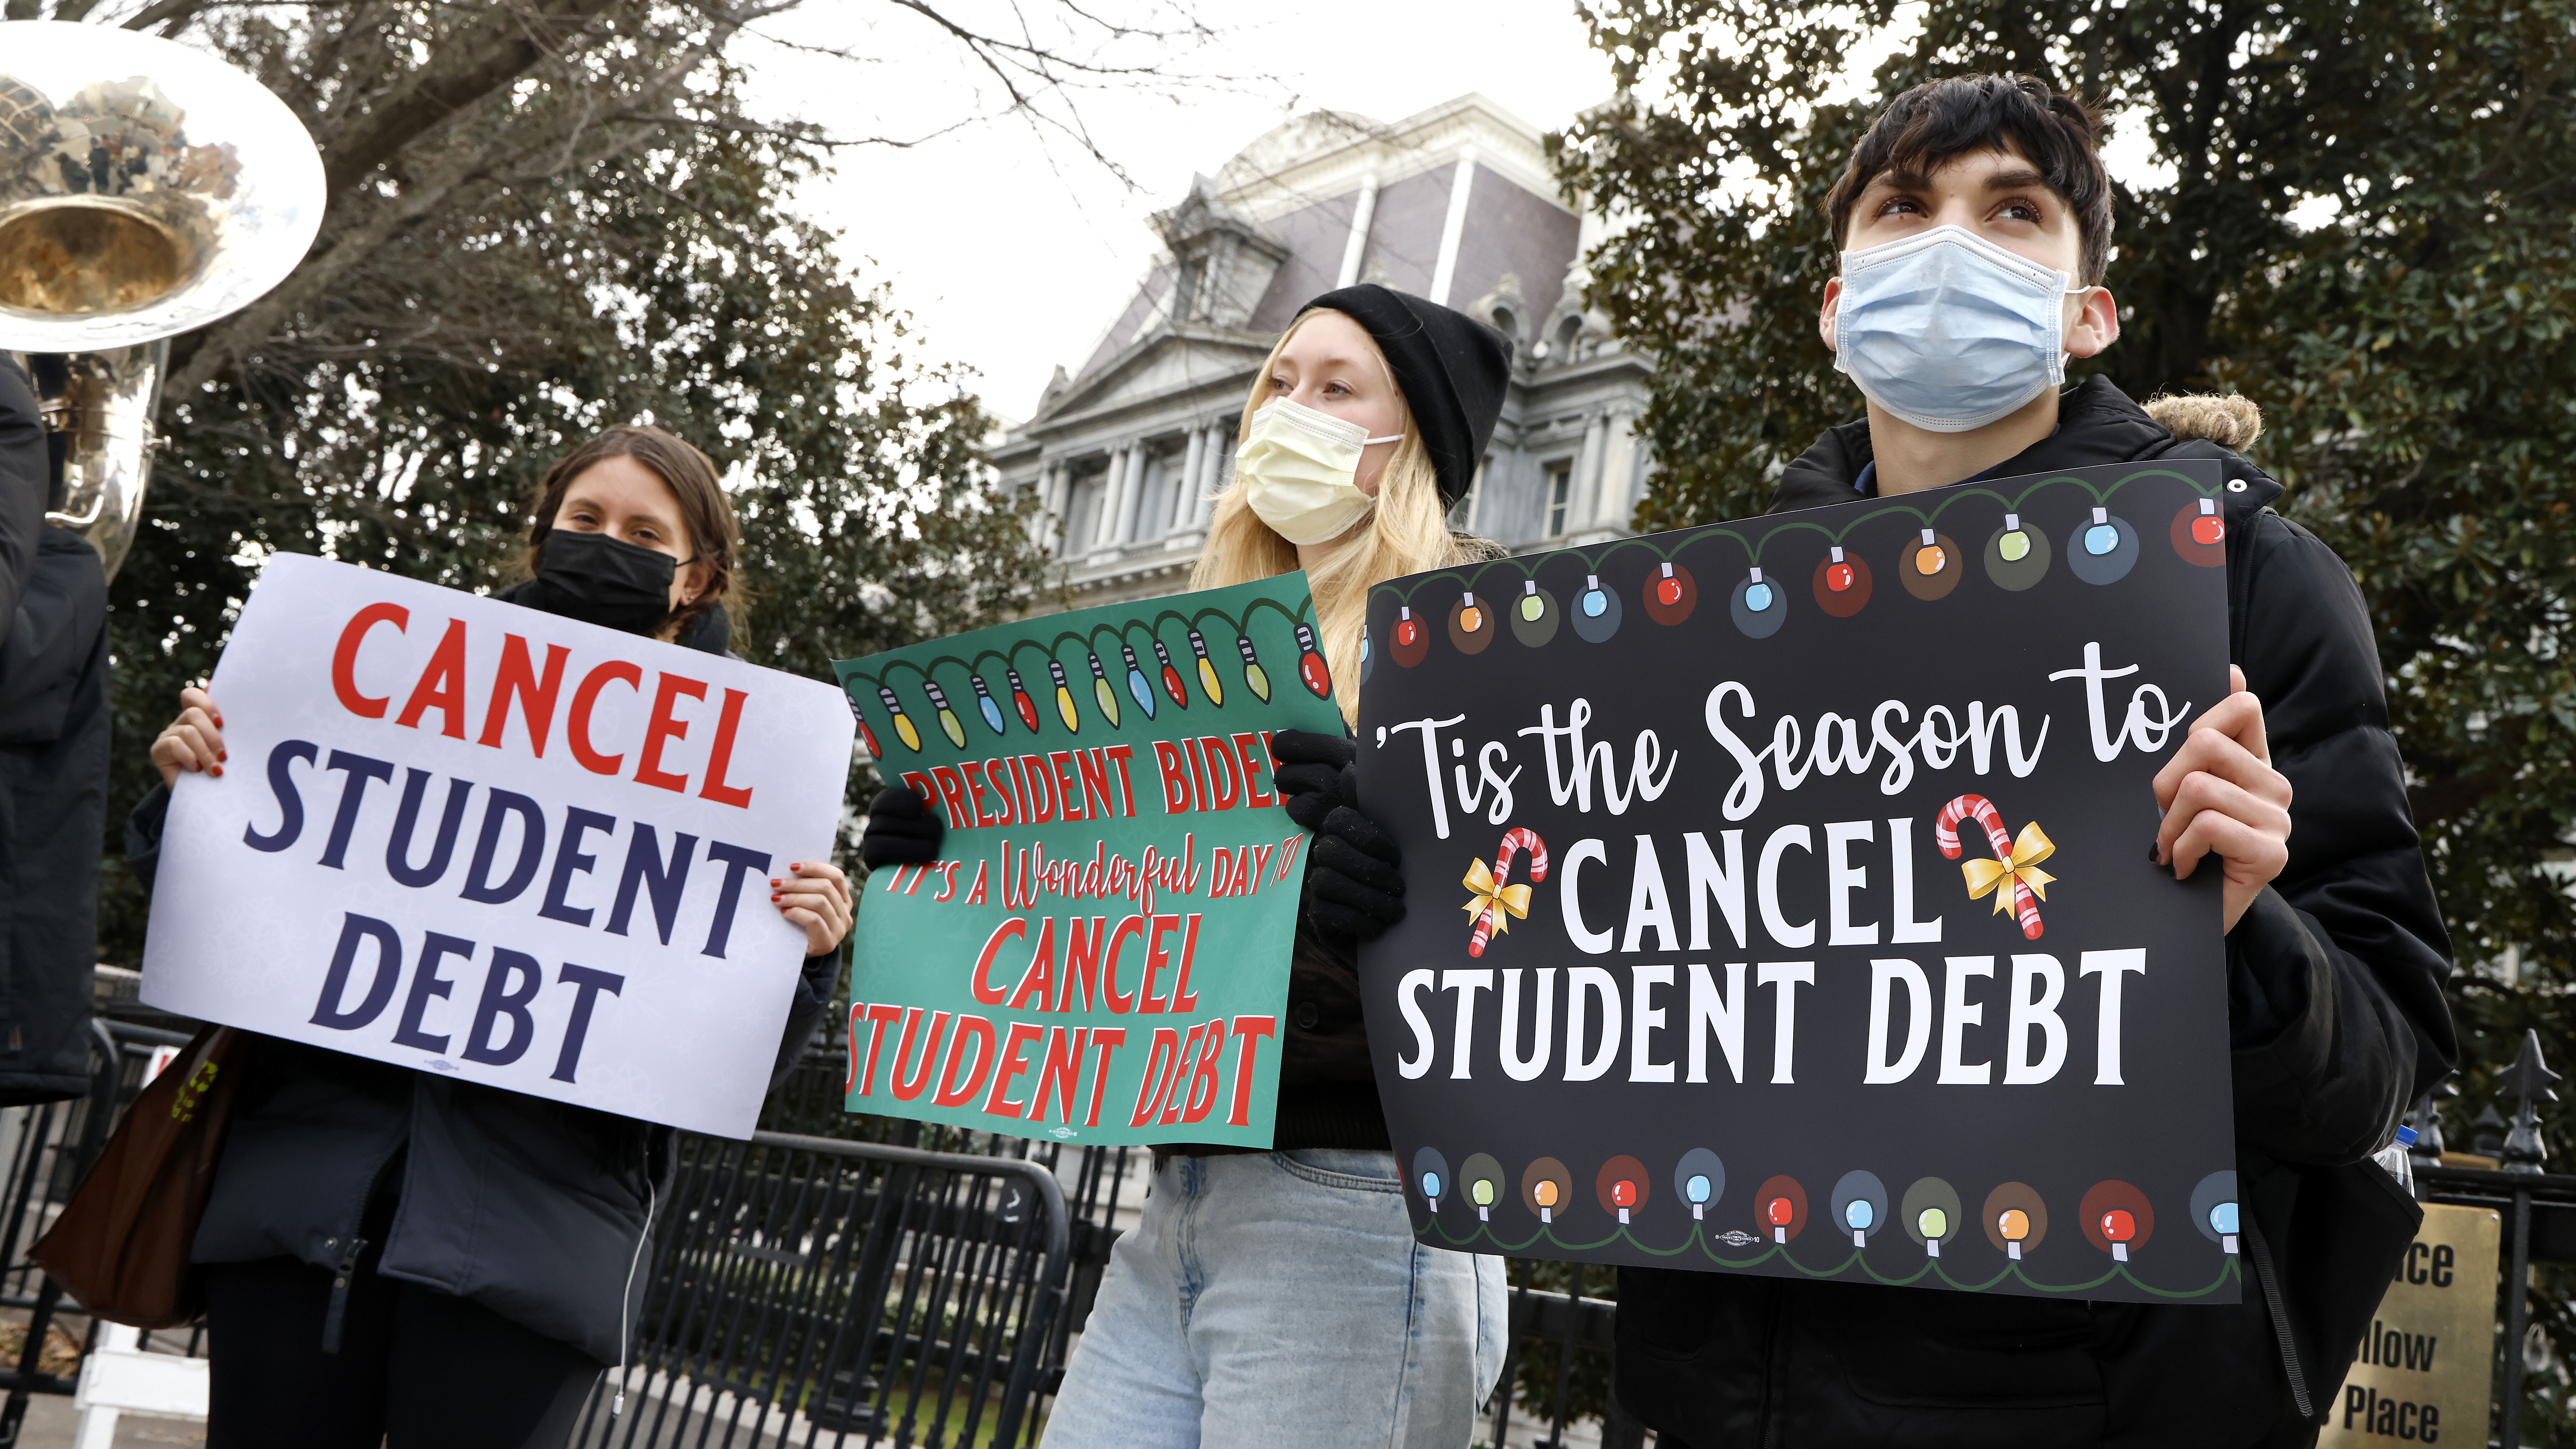 White House says there is no final plan to cancel student debt